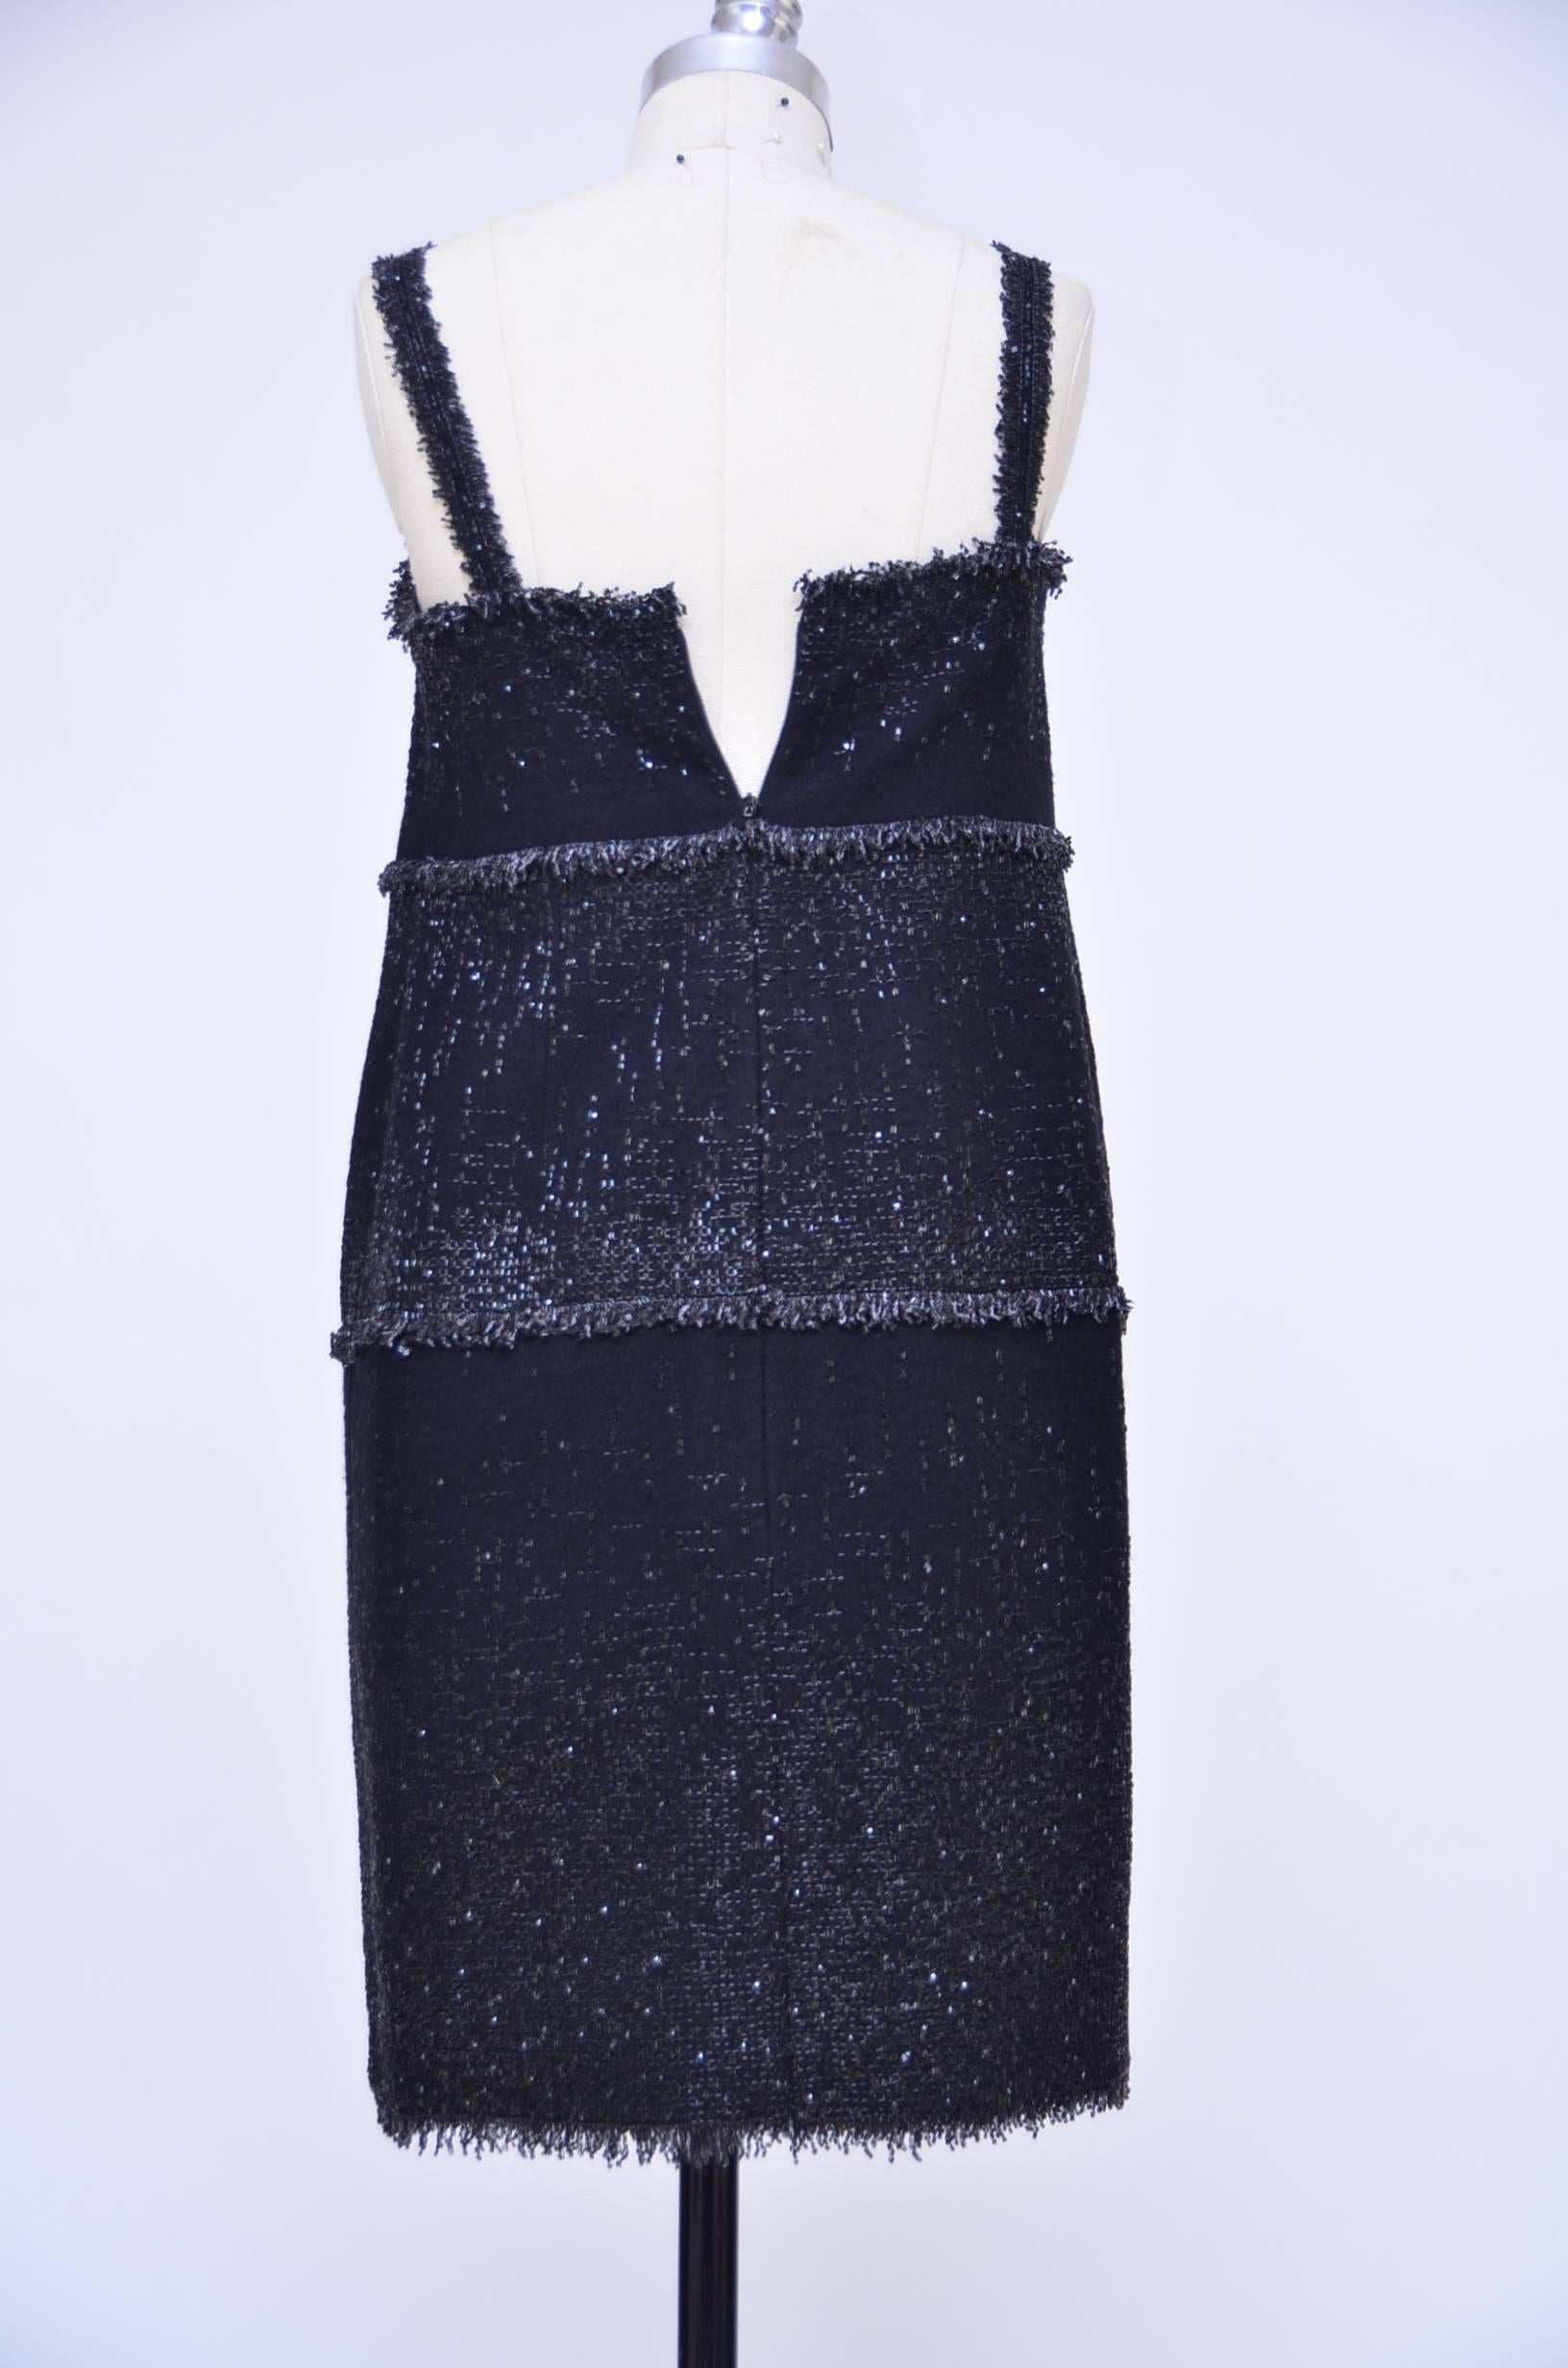 Beautiful Chanel beaded Haute Couture dress.
Slightly heavy due to all embellished beading.Zipper closure on the back.
Approximate measurements:
Underarm 32